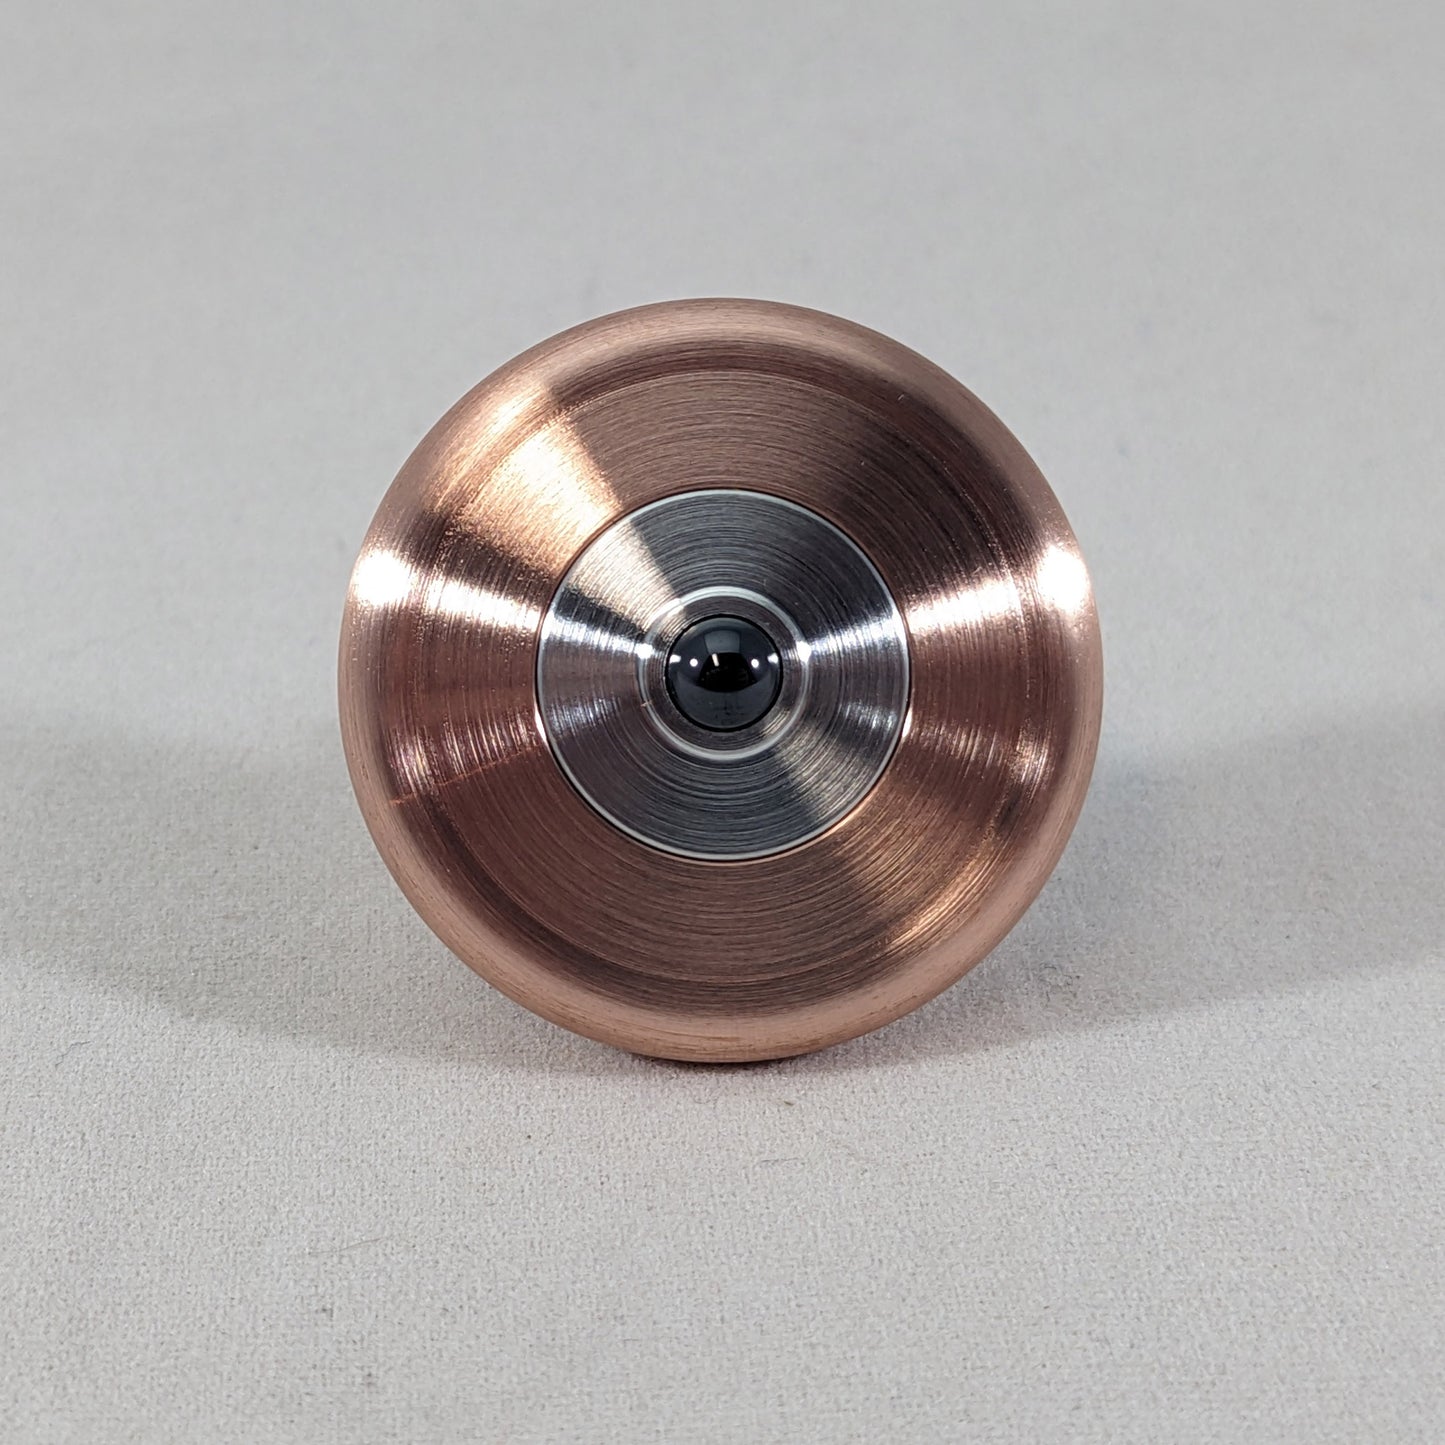 M3 - Brushed Copper & Aluminum Spin Top SG